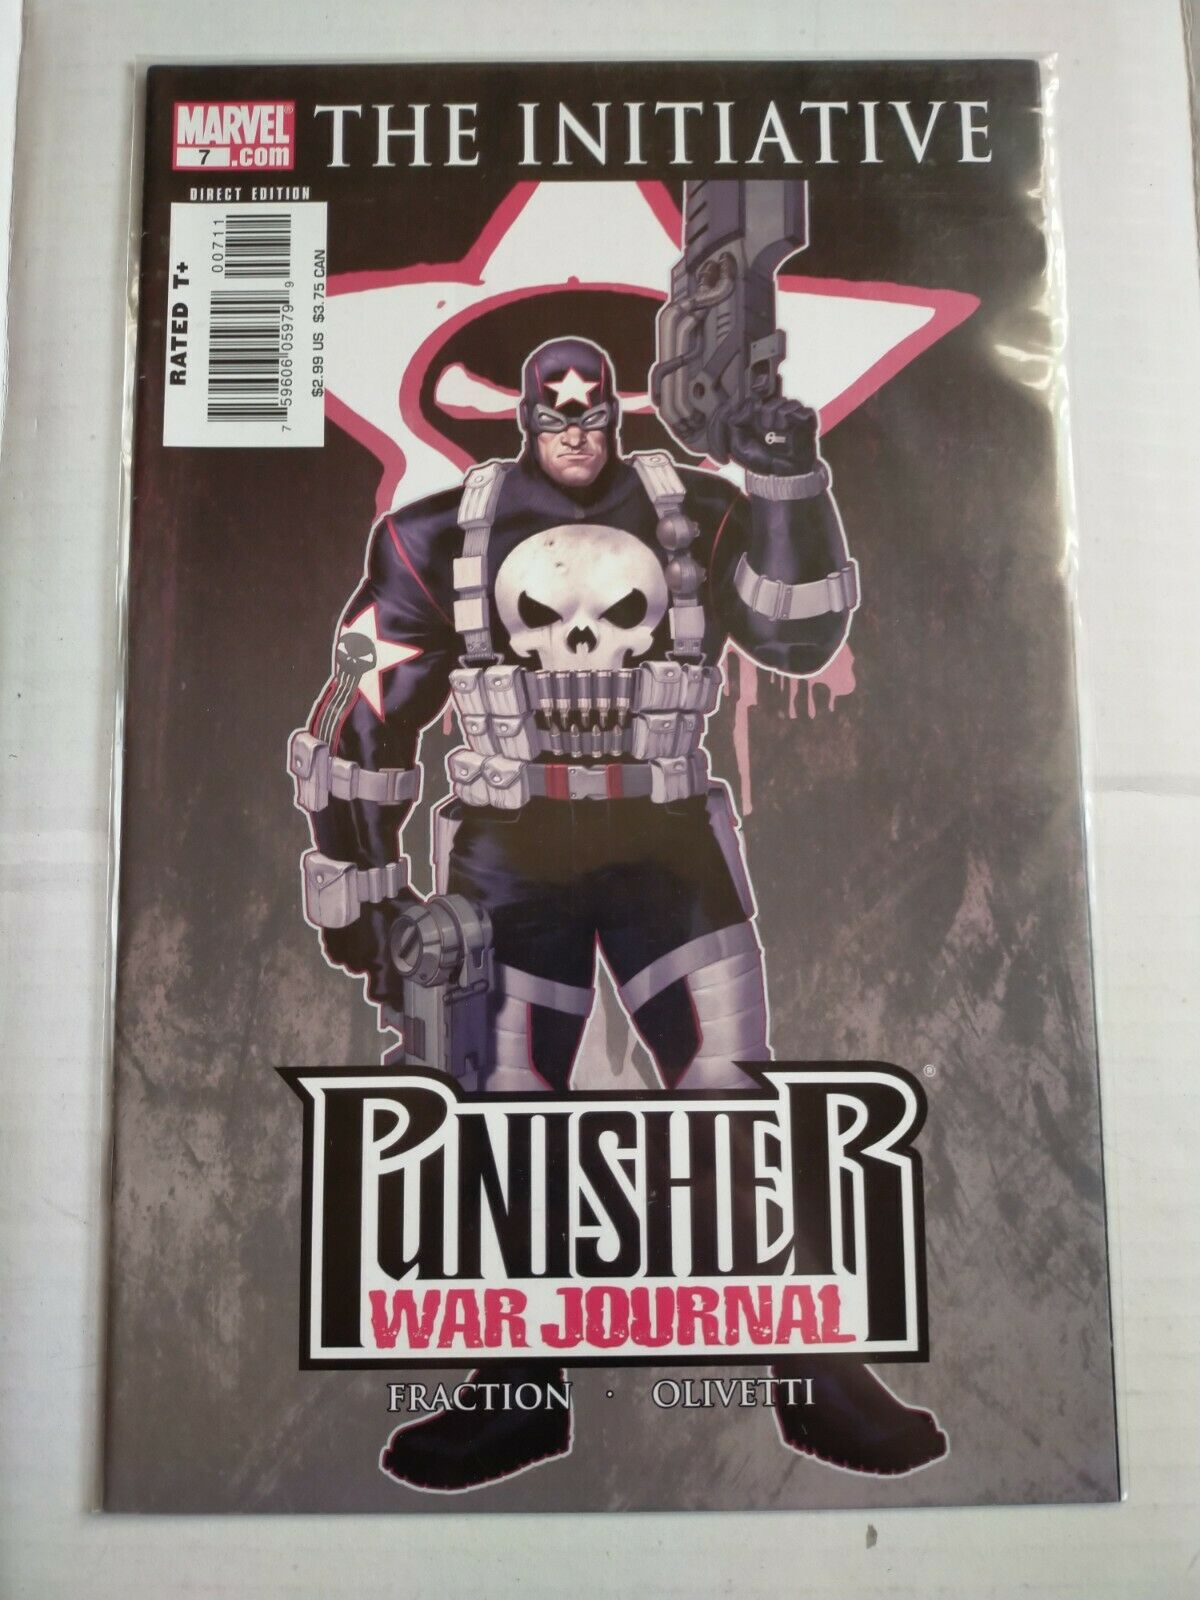 Marvel Comic Book The Initiative The Punisher War Journal No.7